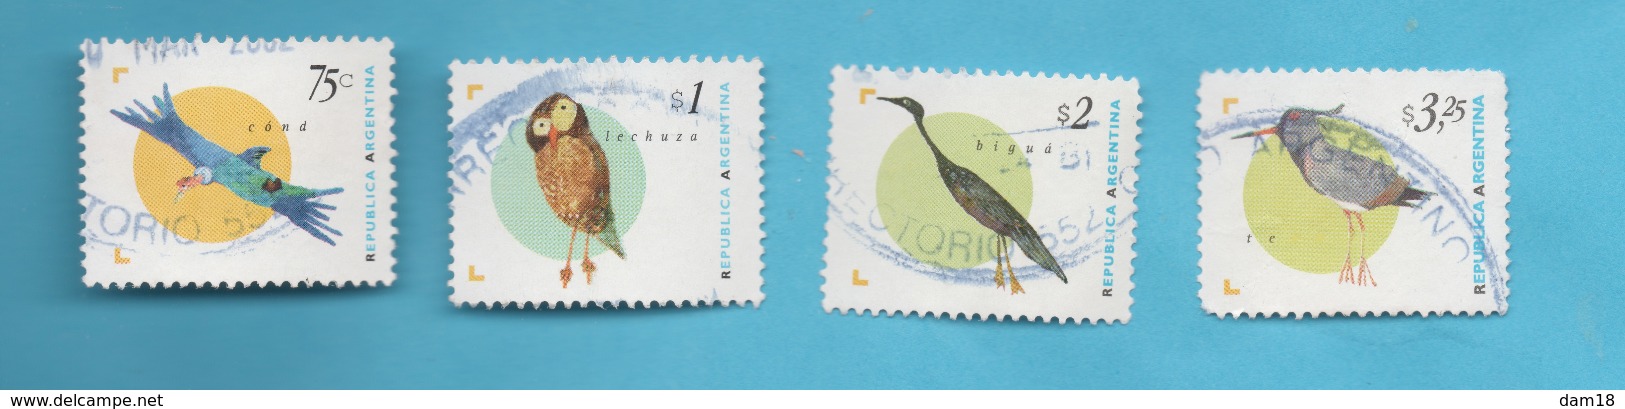 ARGENTINE 1995-98 N° 1881 1889 1890 2037 (o) (YT) VALEUR 10,80 &euro;  FAUNE OISEAUX - Used Stamps